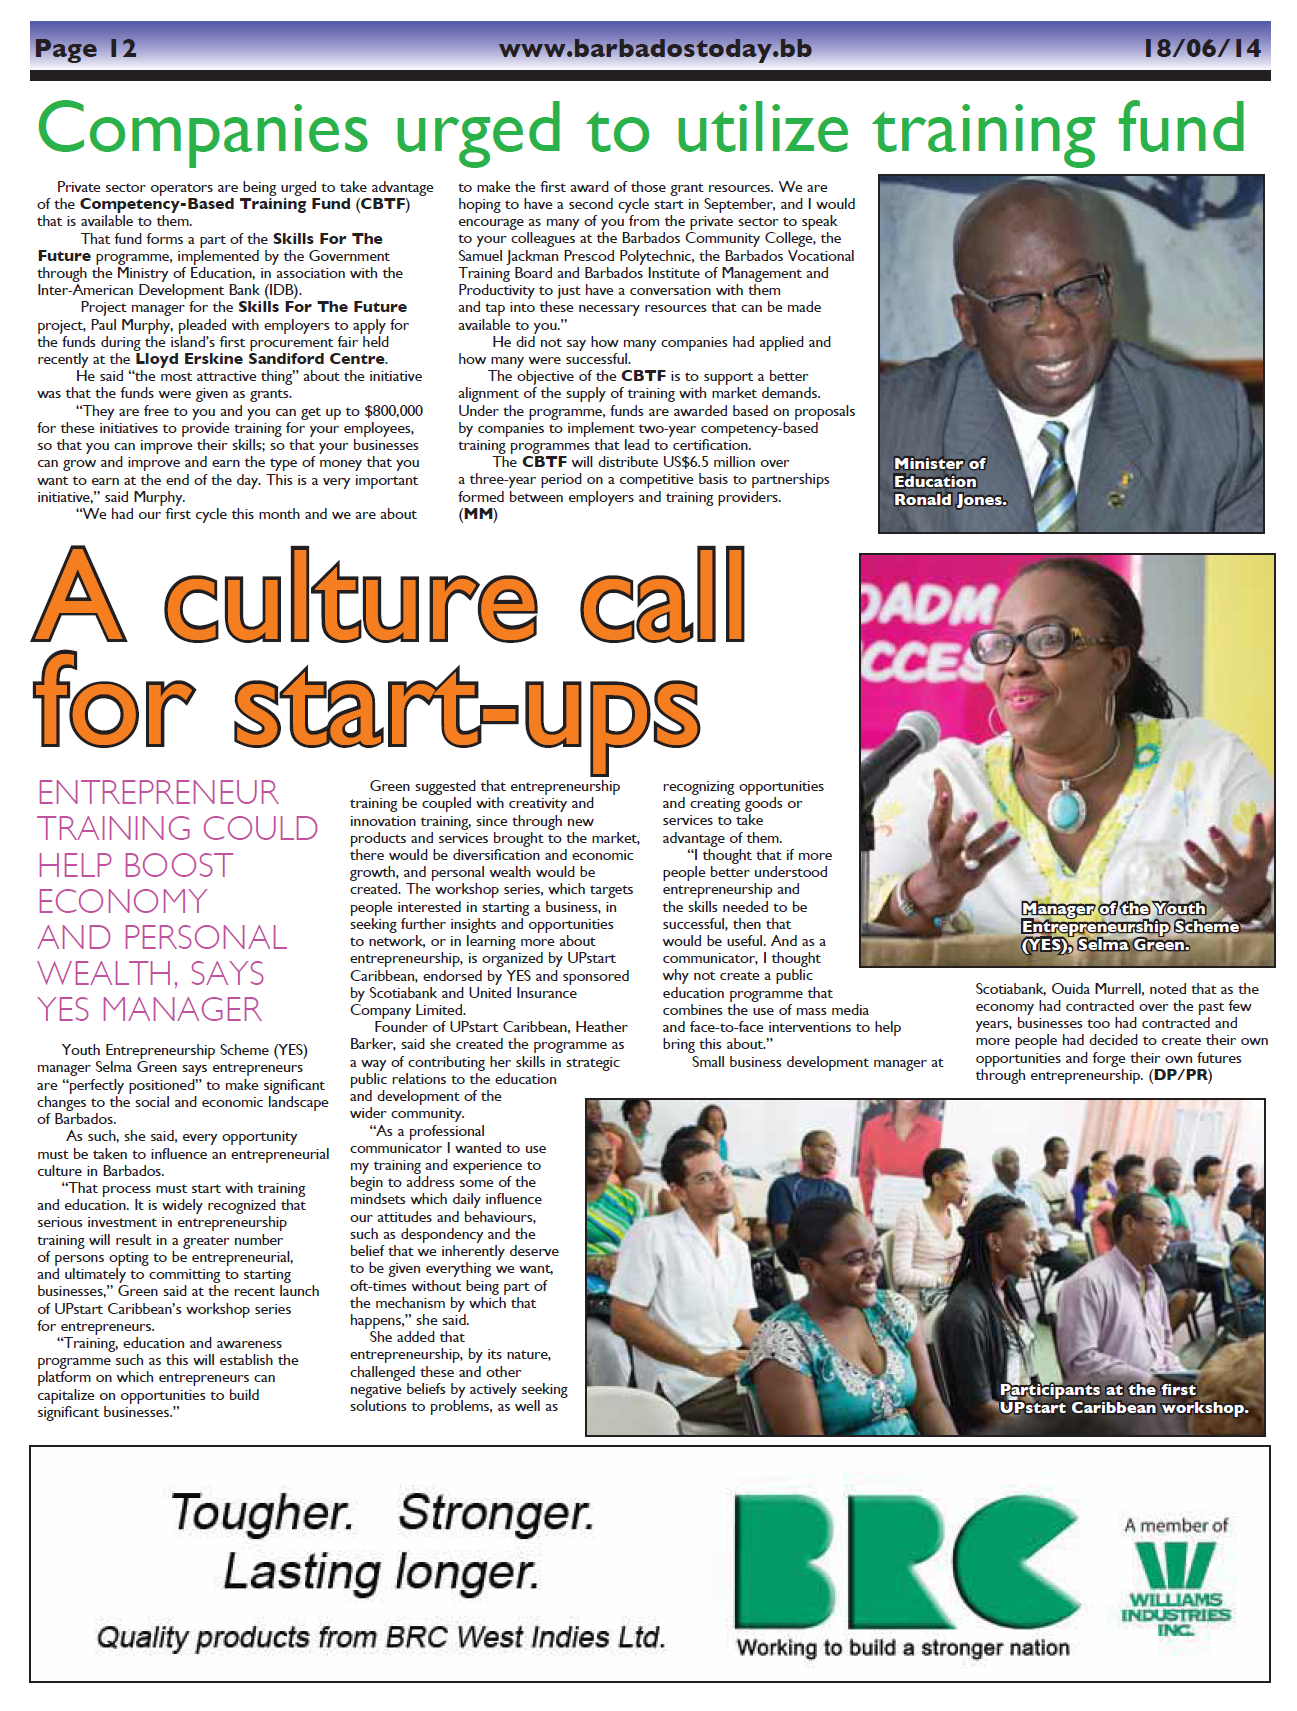 A Culture Call for Start ups (Barbados Today) – June 18, 2014